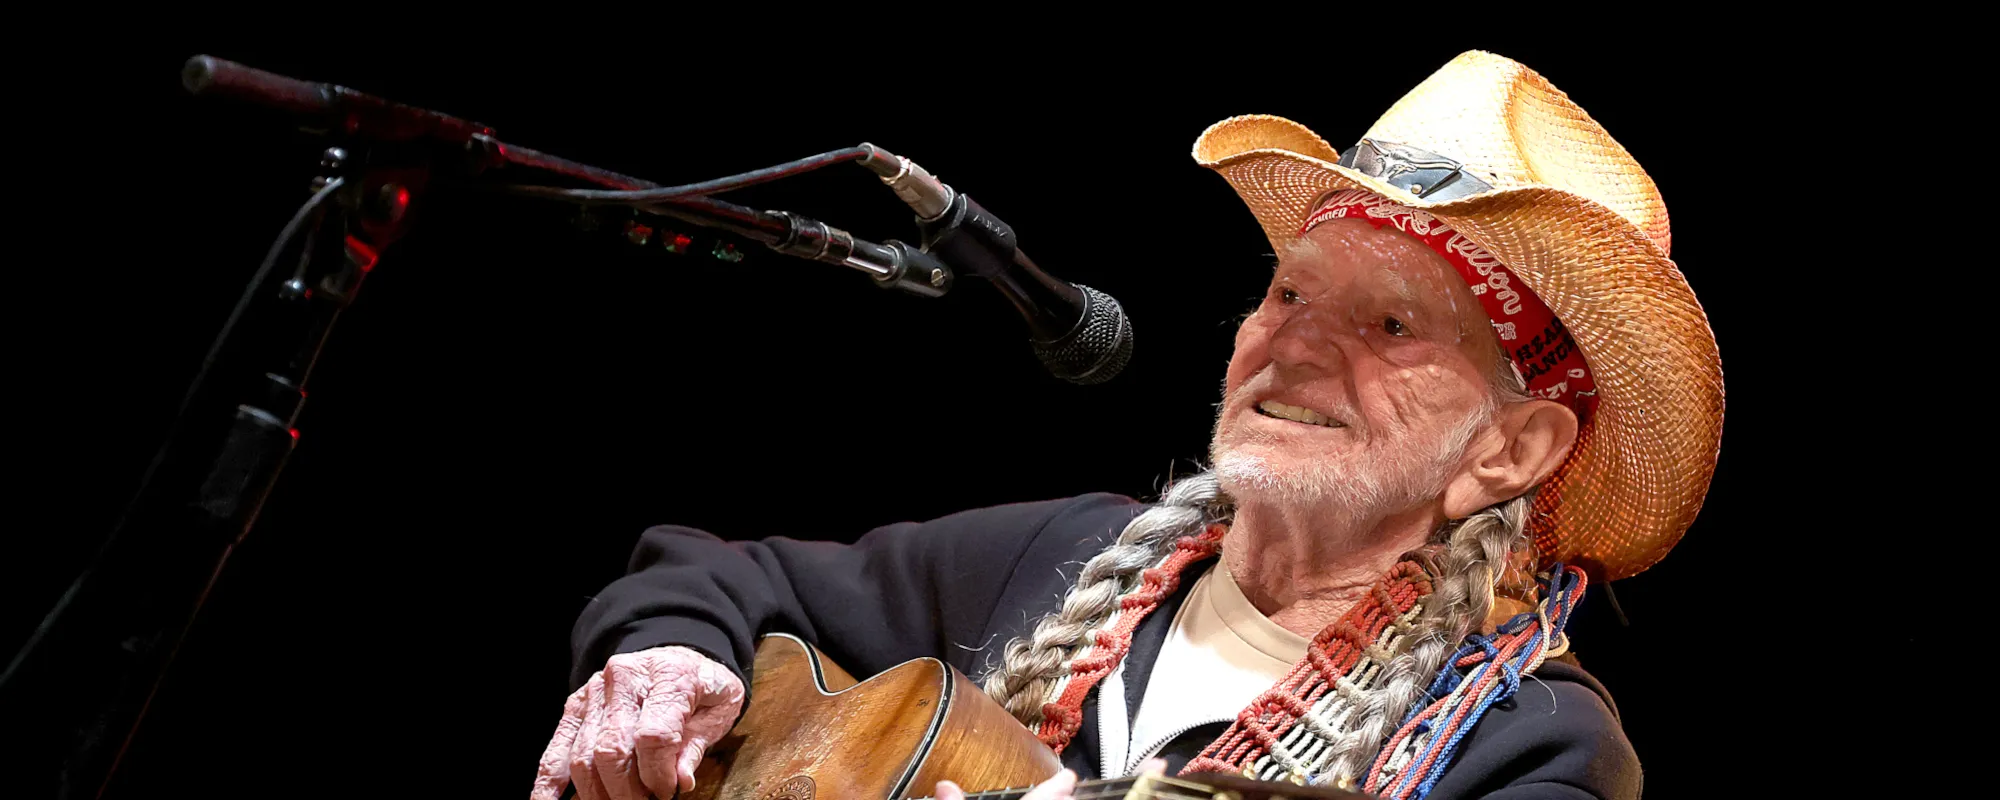 7 Traditional Country Albums You Don’t Want to Miss Out On